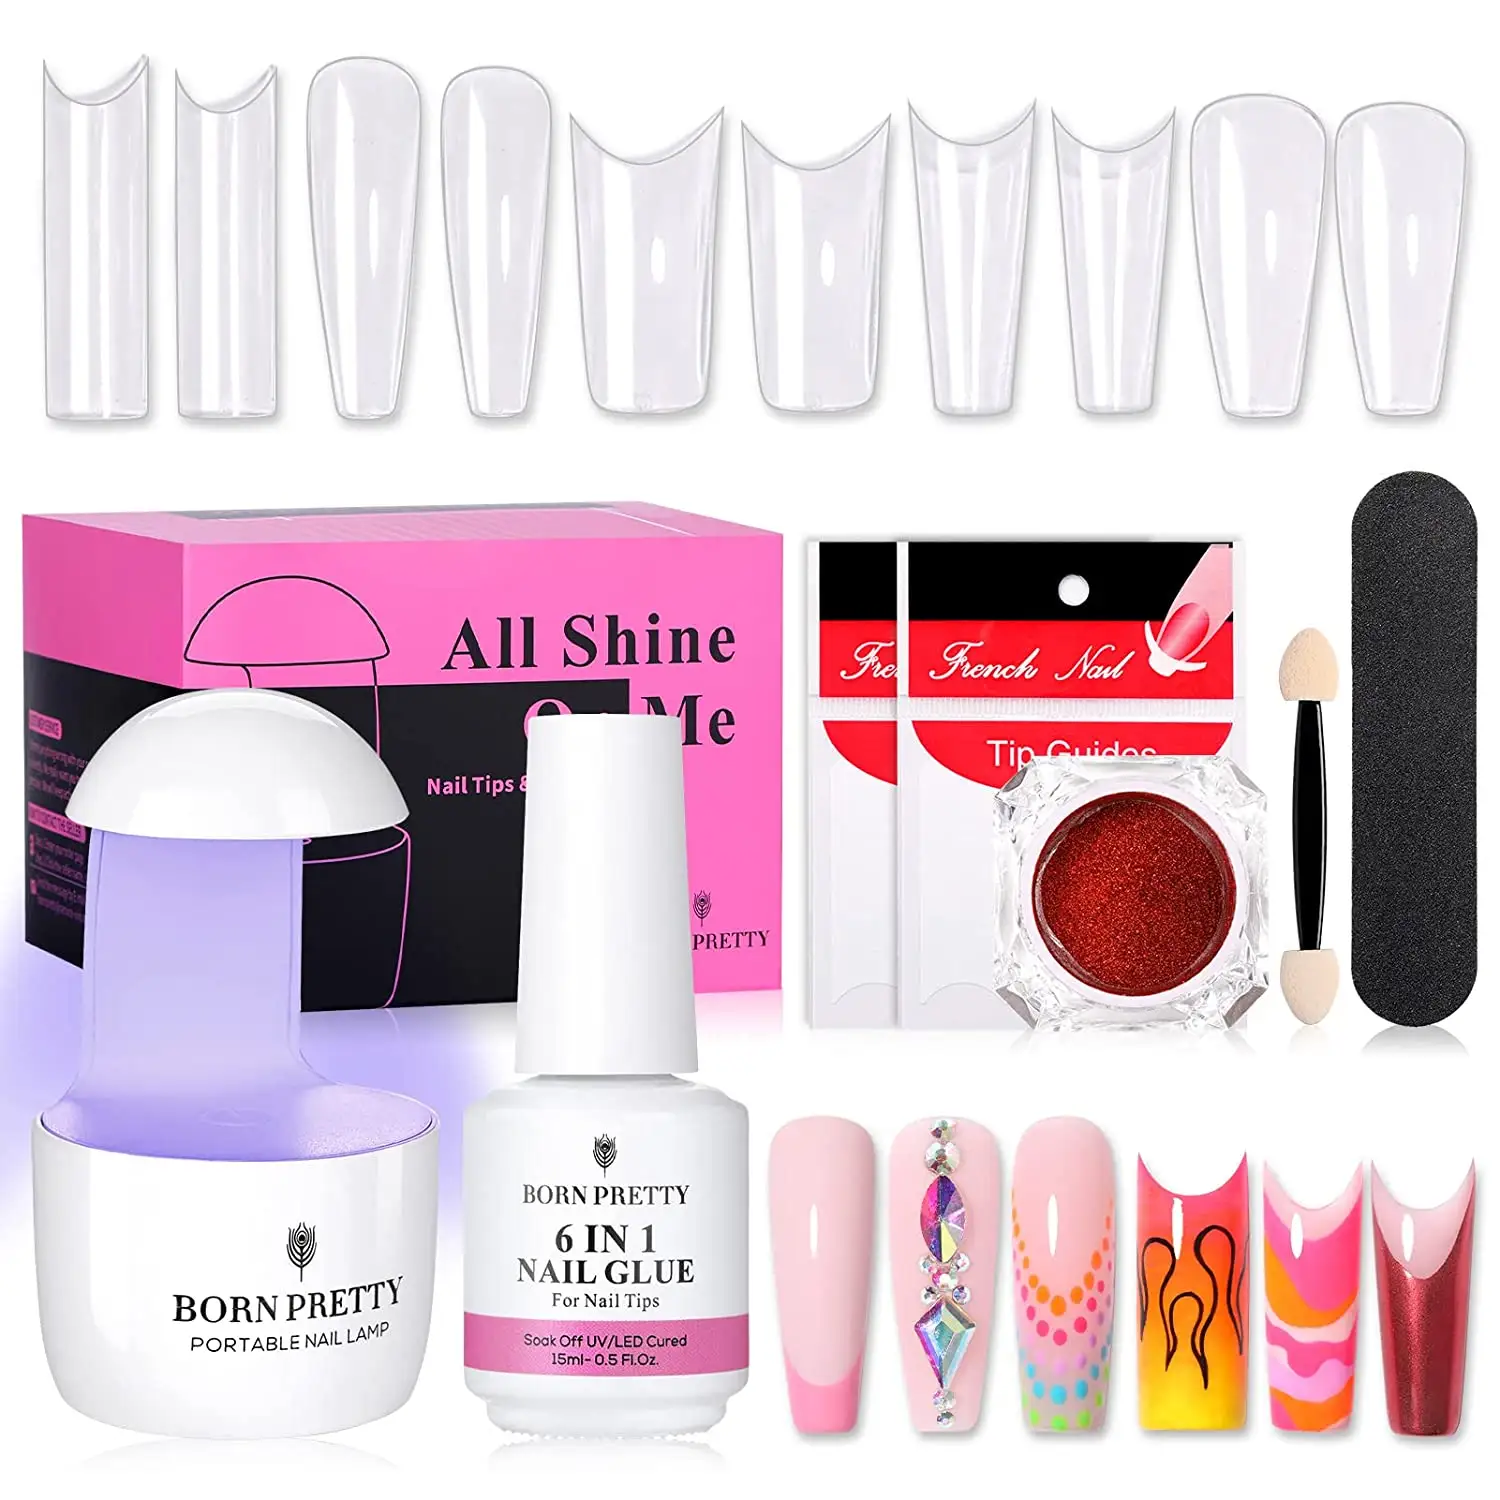 BORN PRETTY Hot Selling Acrylic Nail Extension Gel X Nails Kit With C Curve Nail Tips And Glue